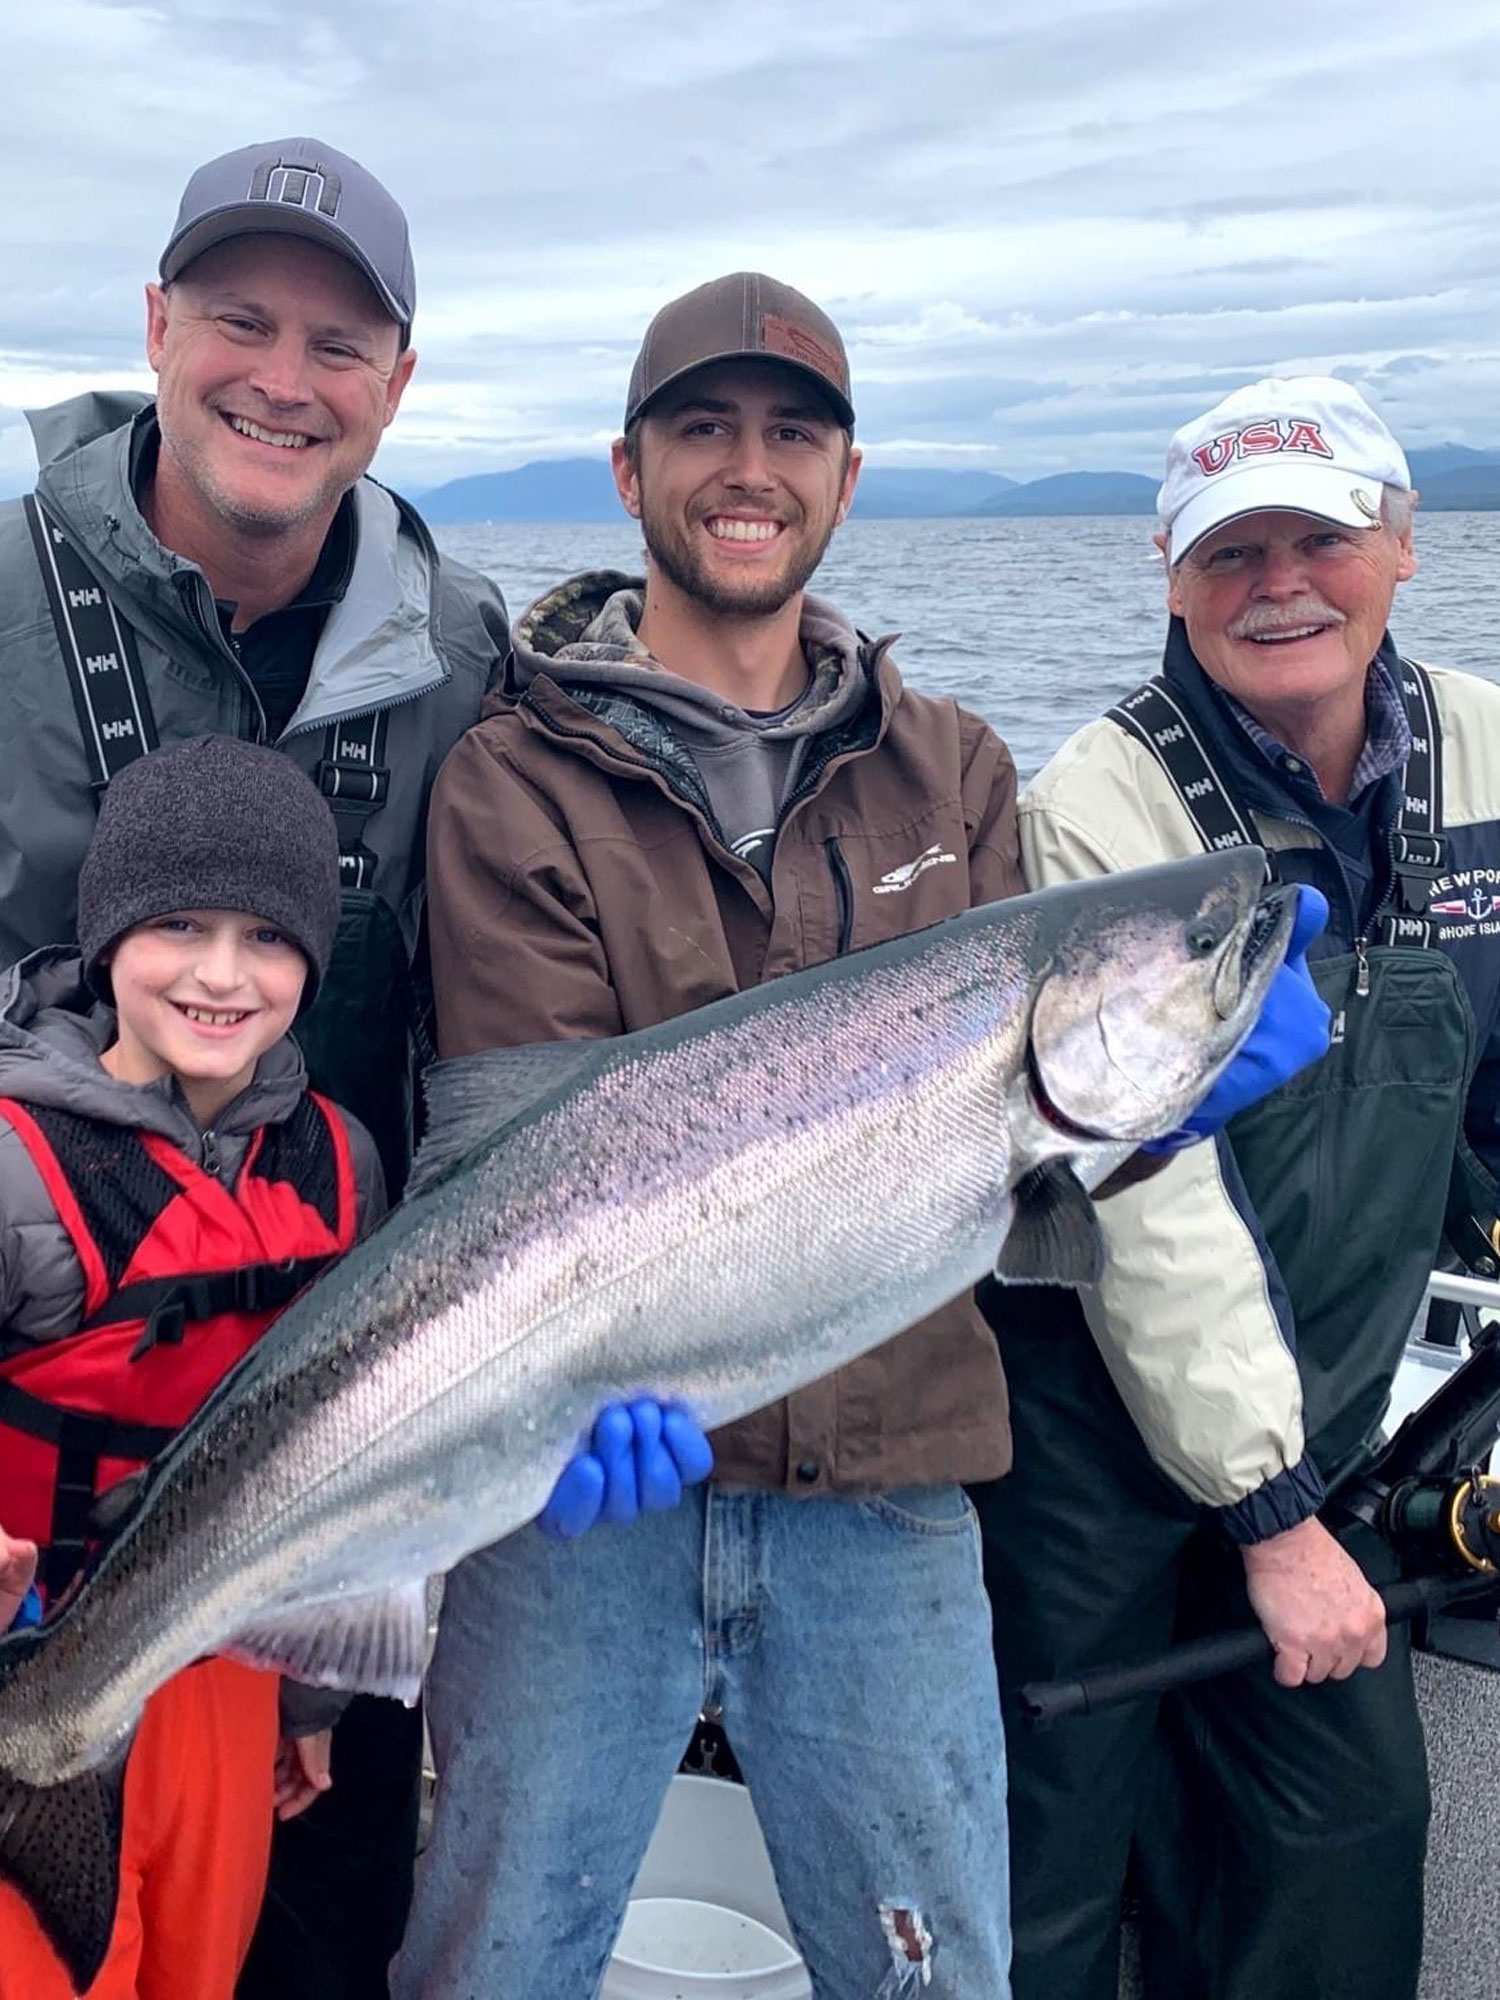 Captain Aaron of Ketchikan fishing holding a large fish that two adult males and one child caught on a fishing trip.